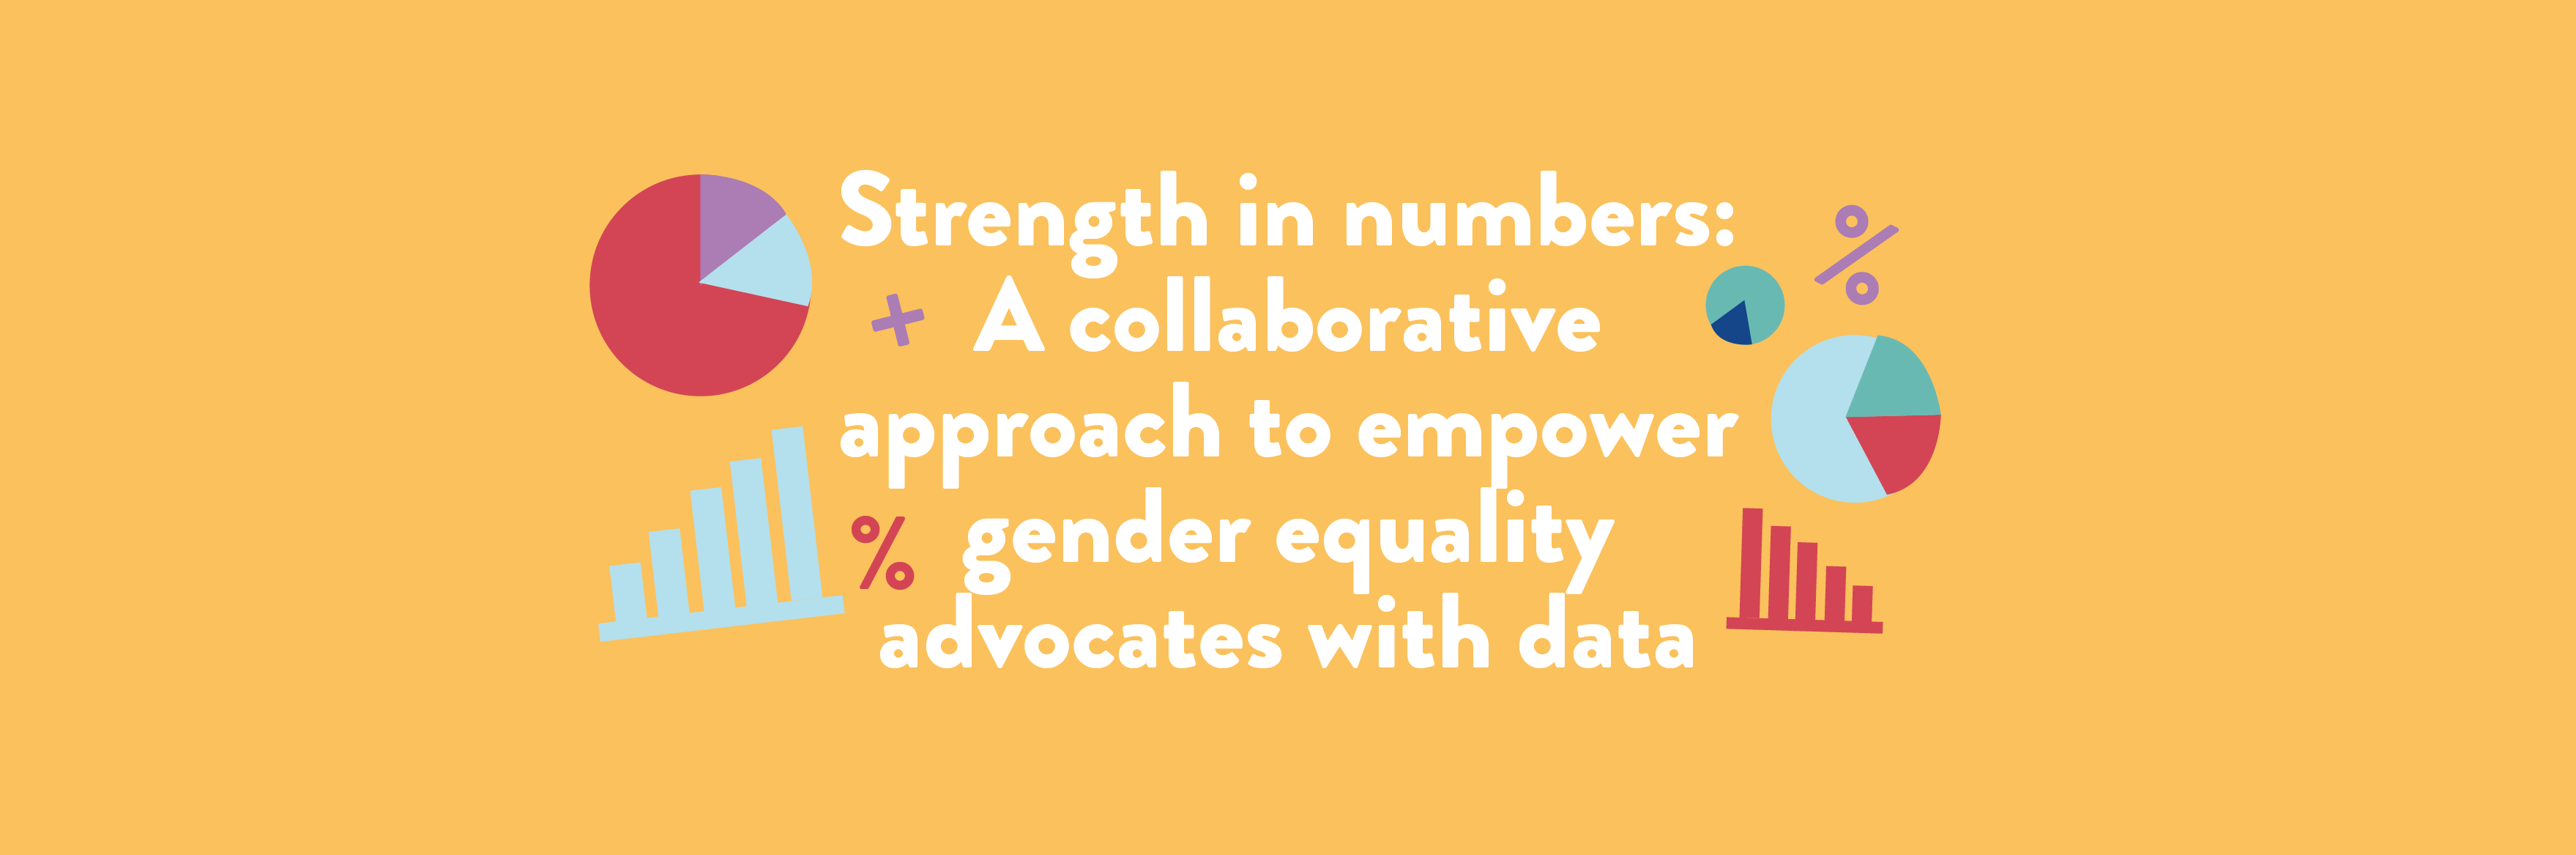 Strength in numbers: A collaborative approach to empower gender equality advocates with data